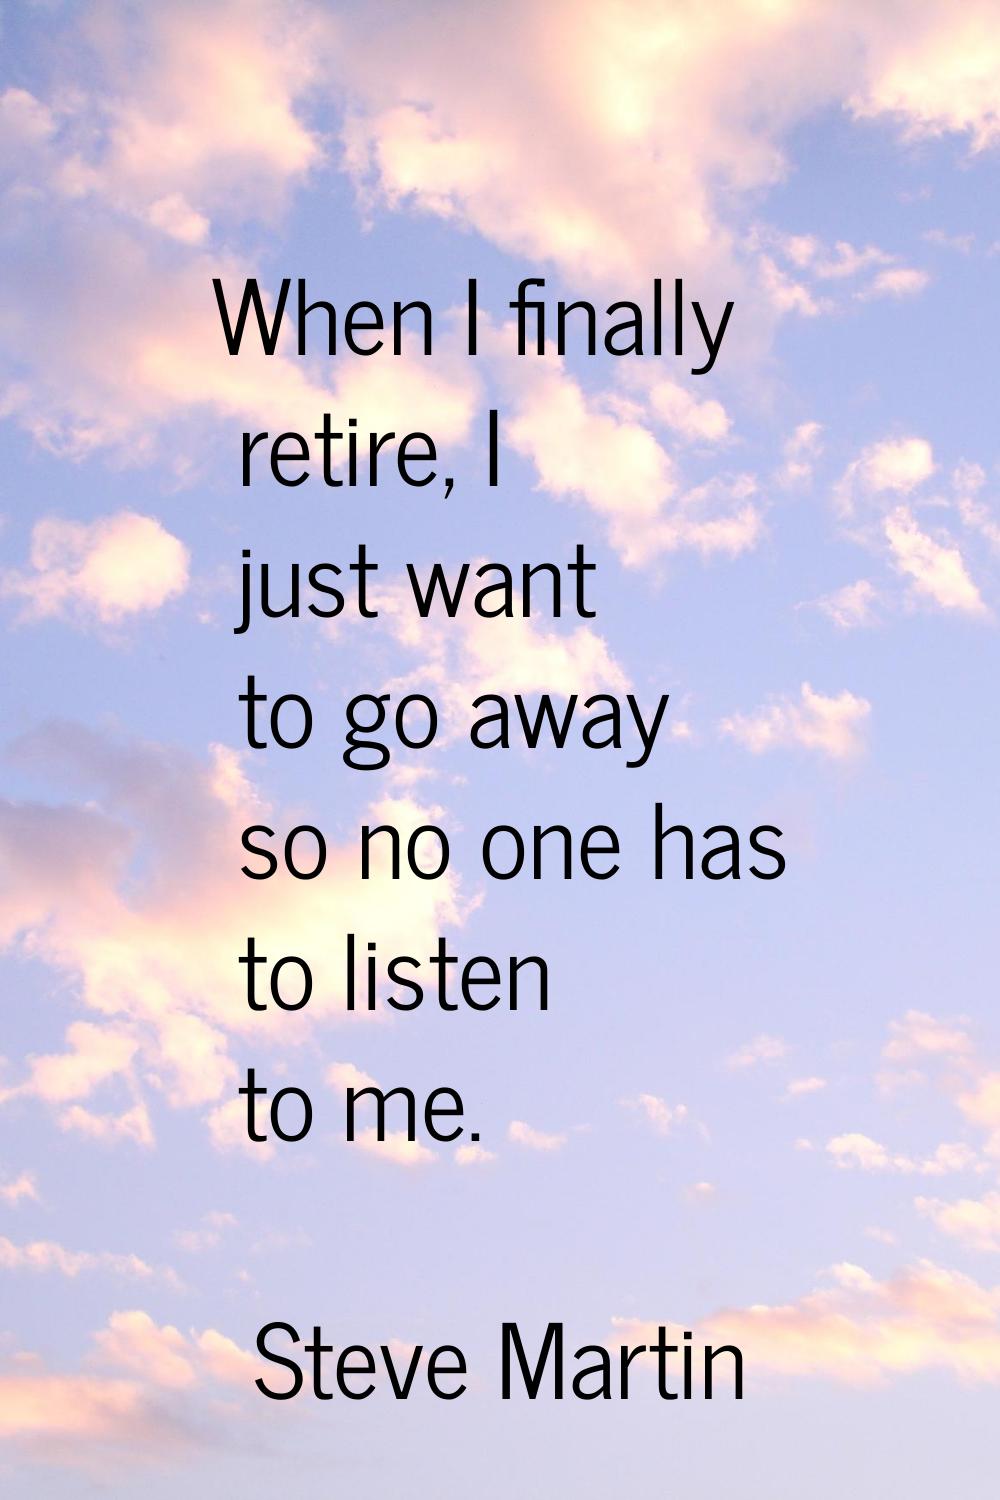 When I finally retire, I just want to go away so no one has to listen to me.